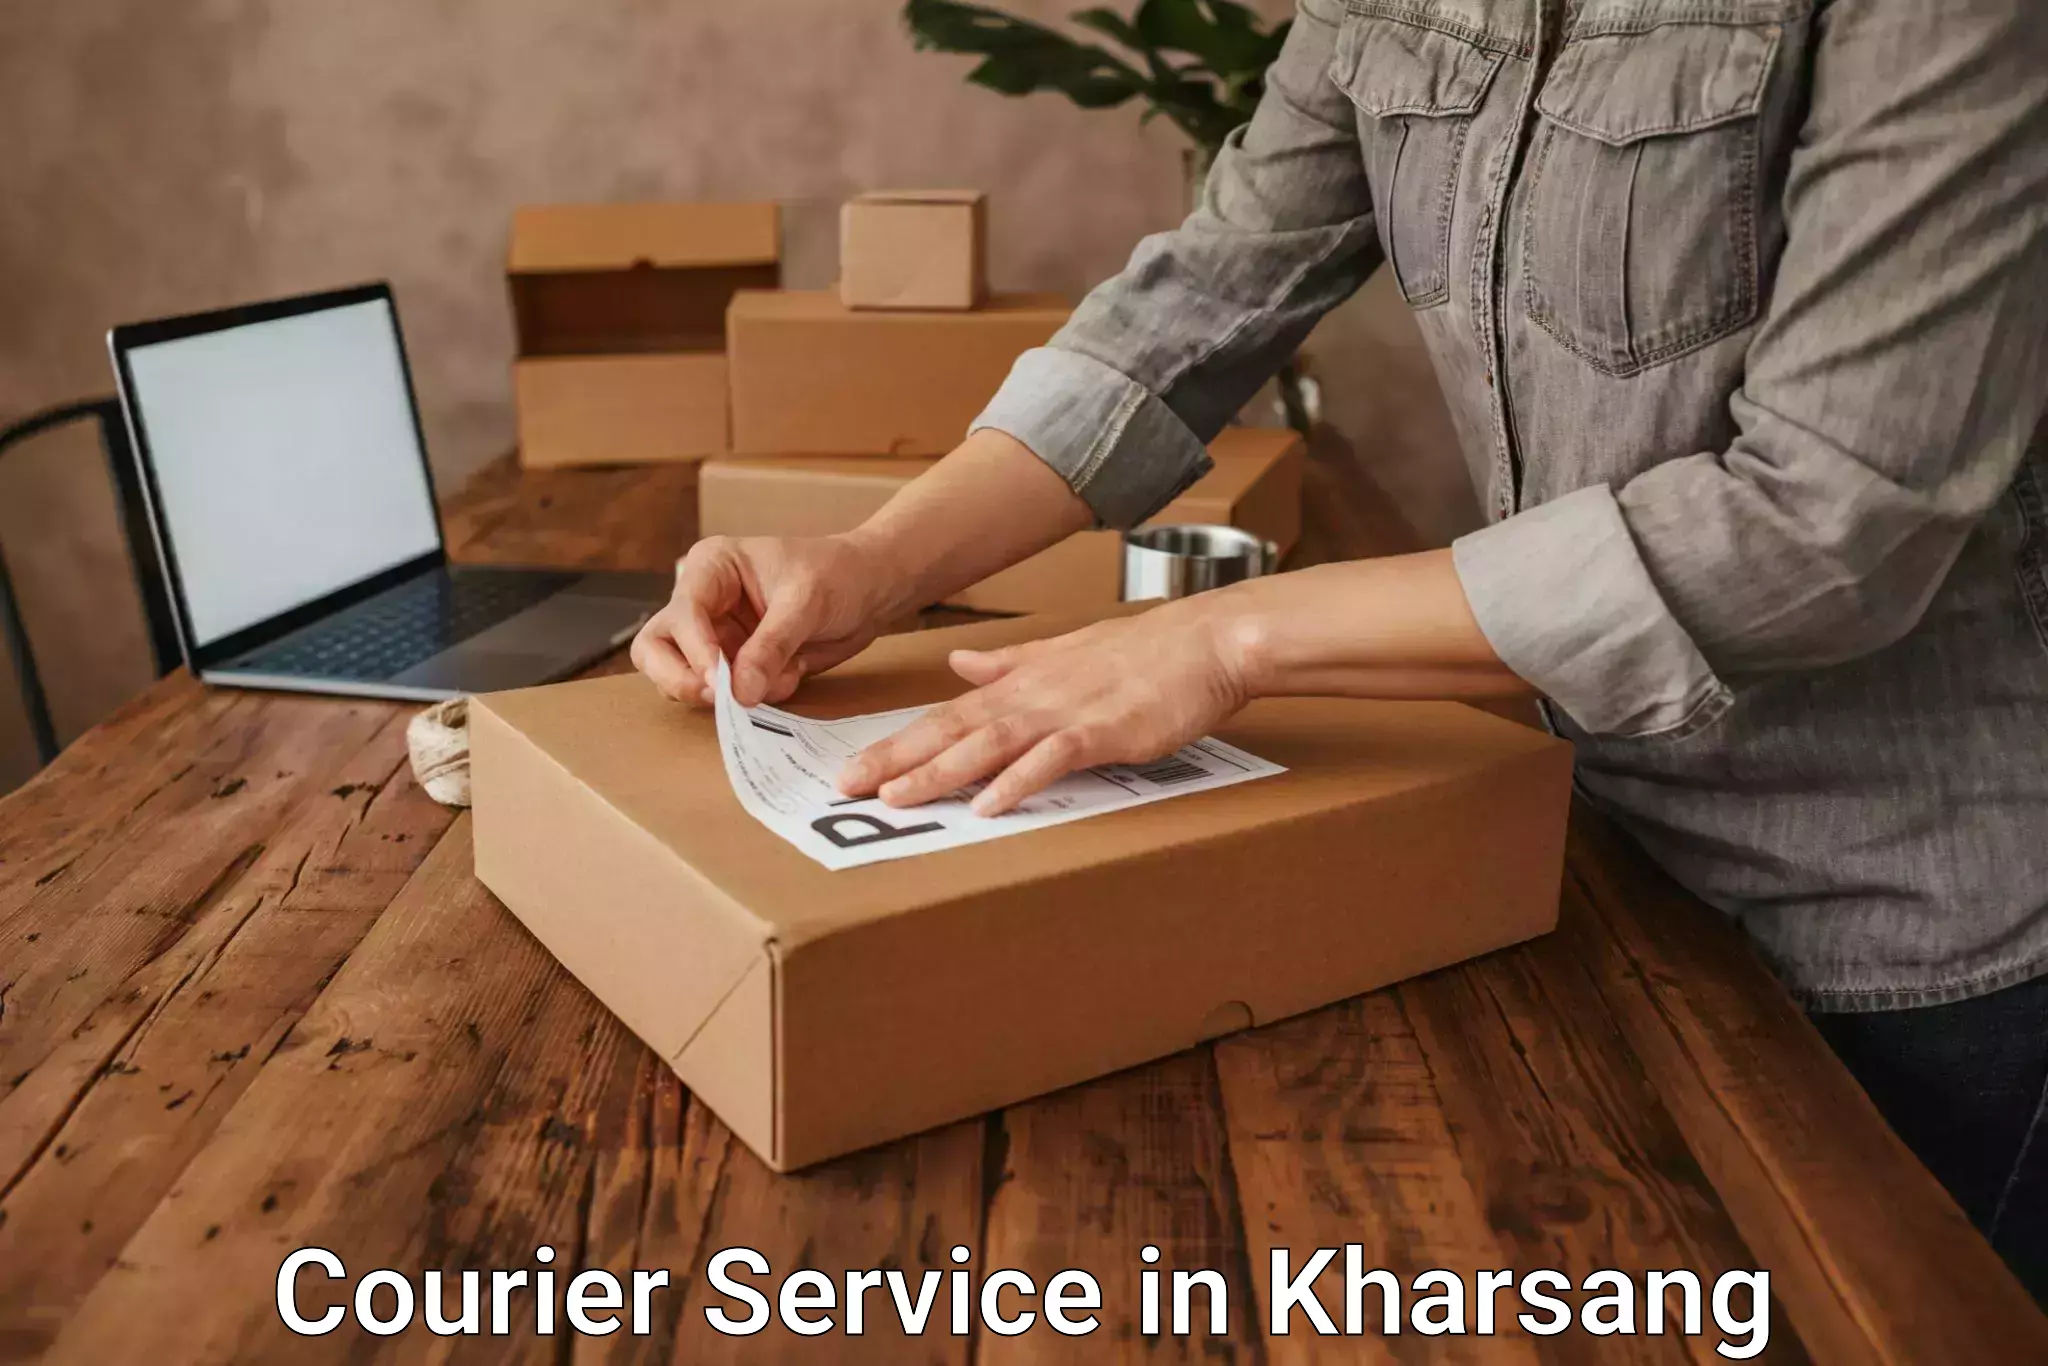 On-demand shipping options in Kharsang